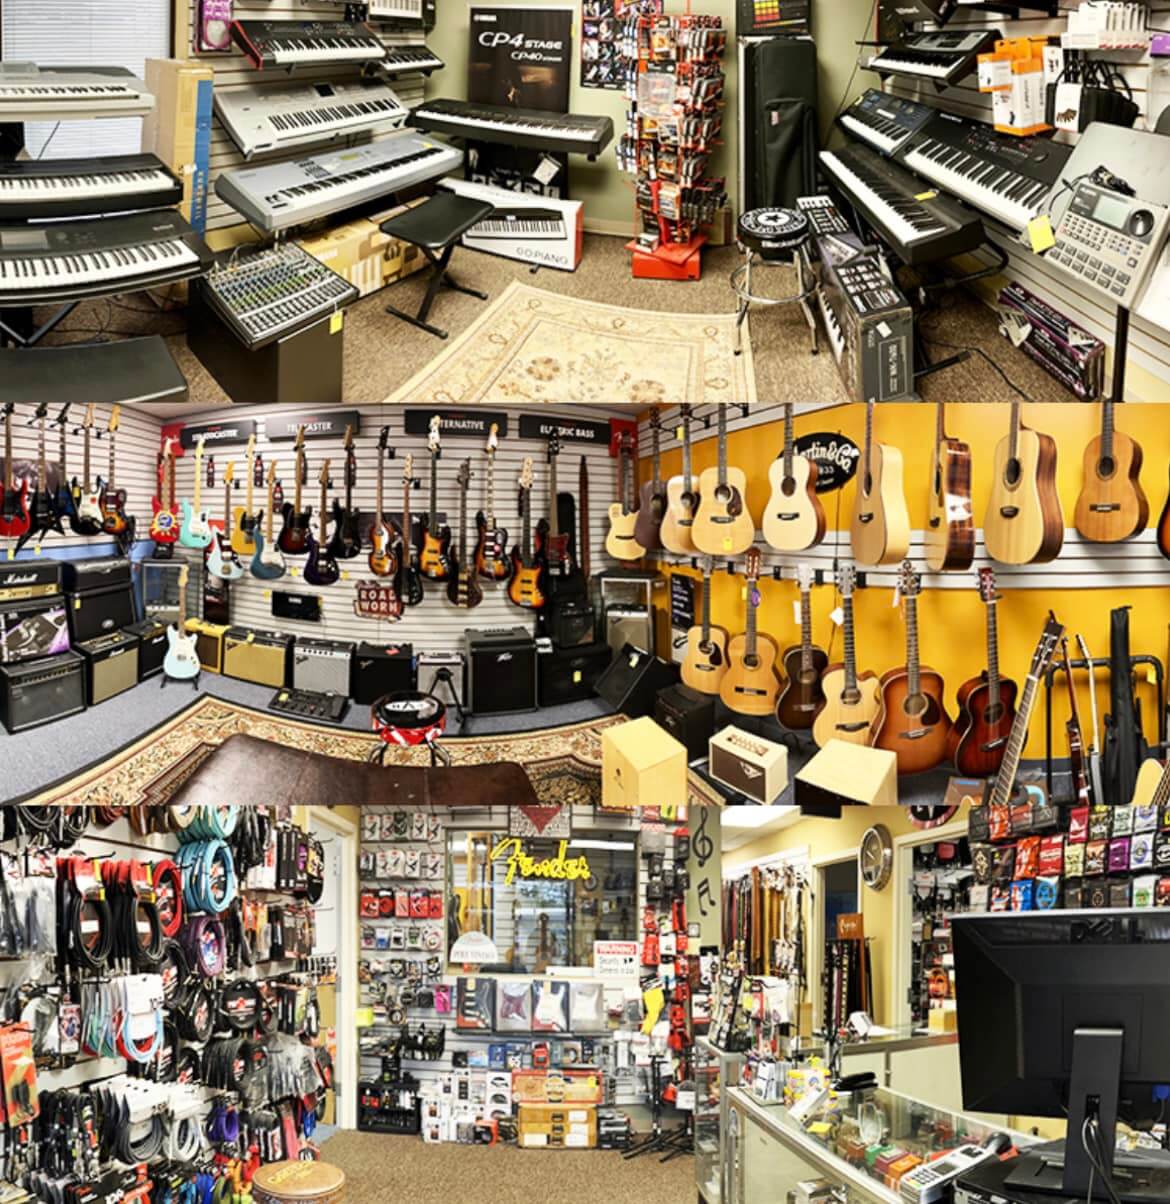 photo of the 8th Street Music showroom featuring guitars, keyboards, drums, amps and more